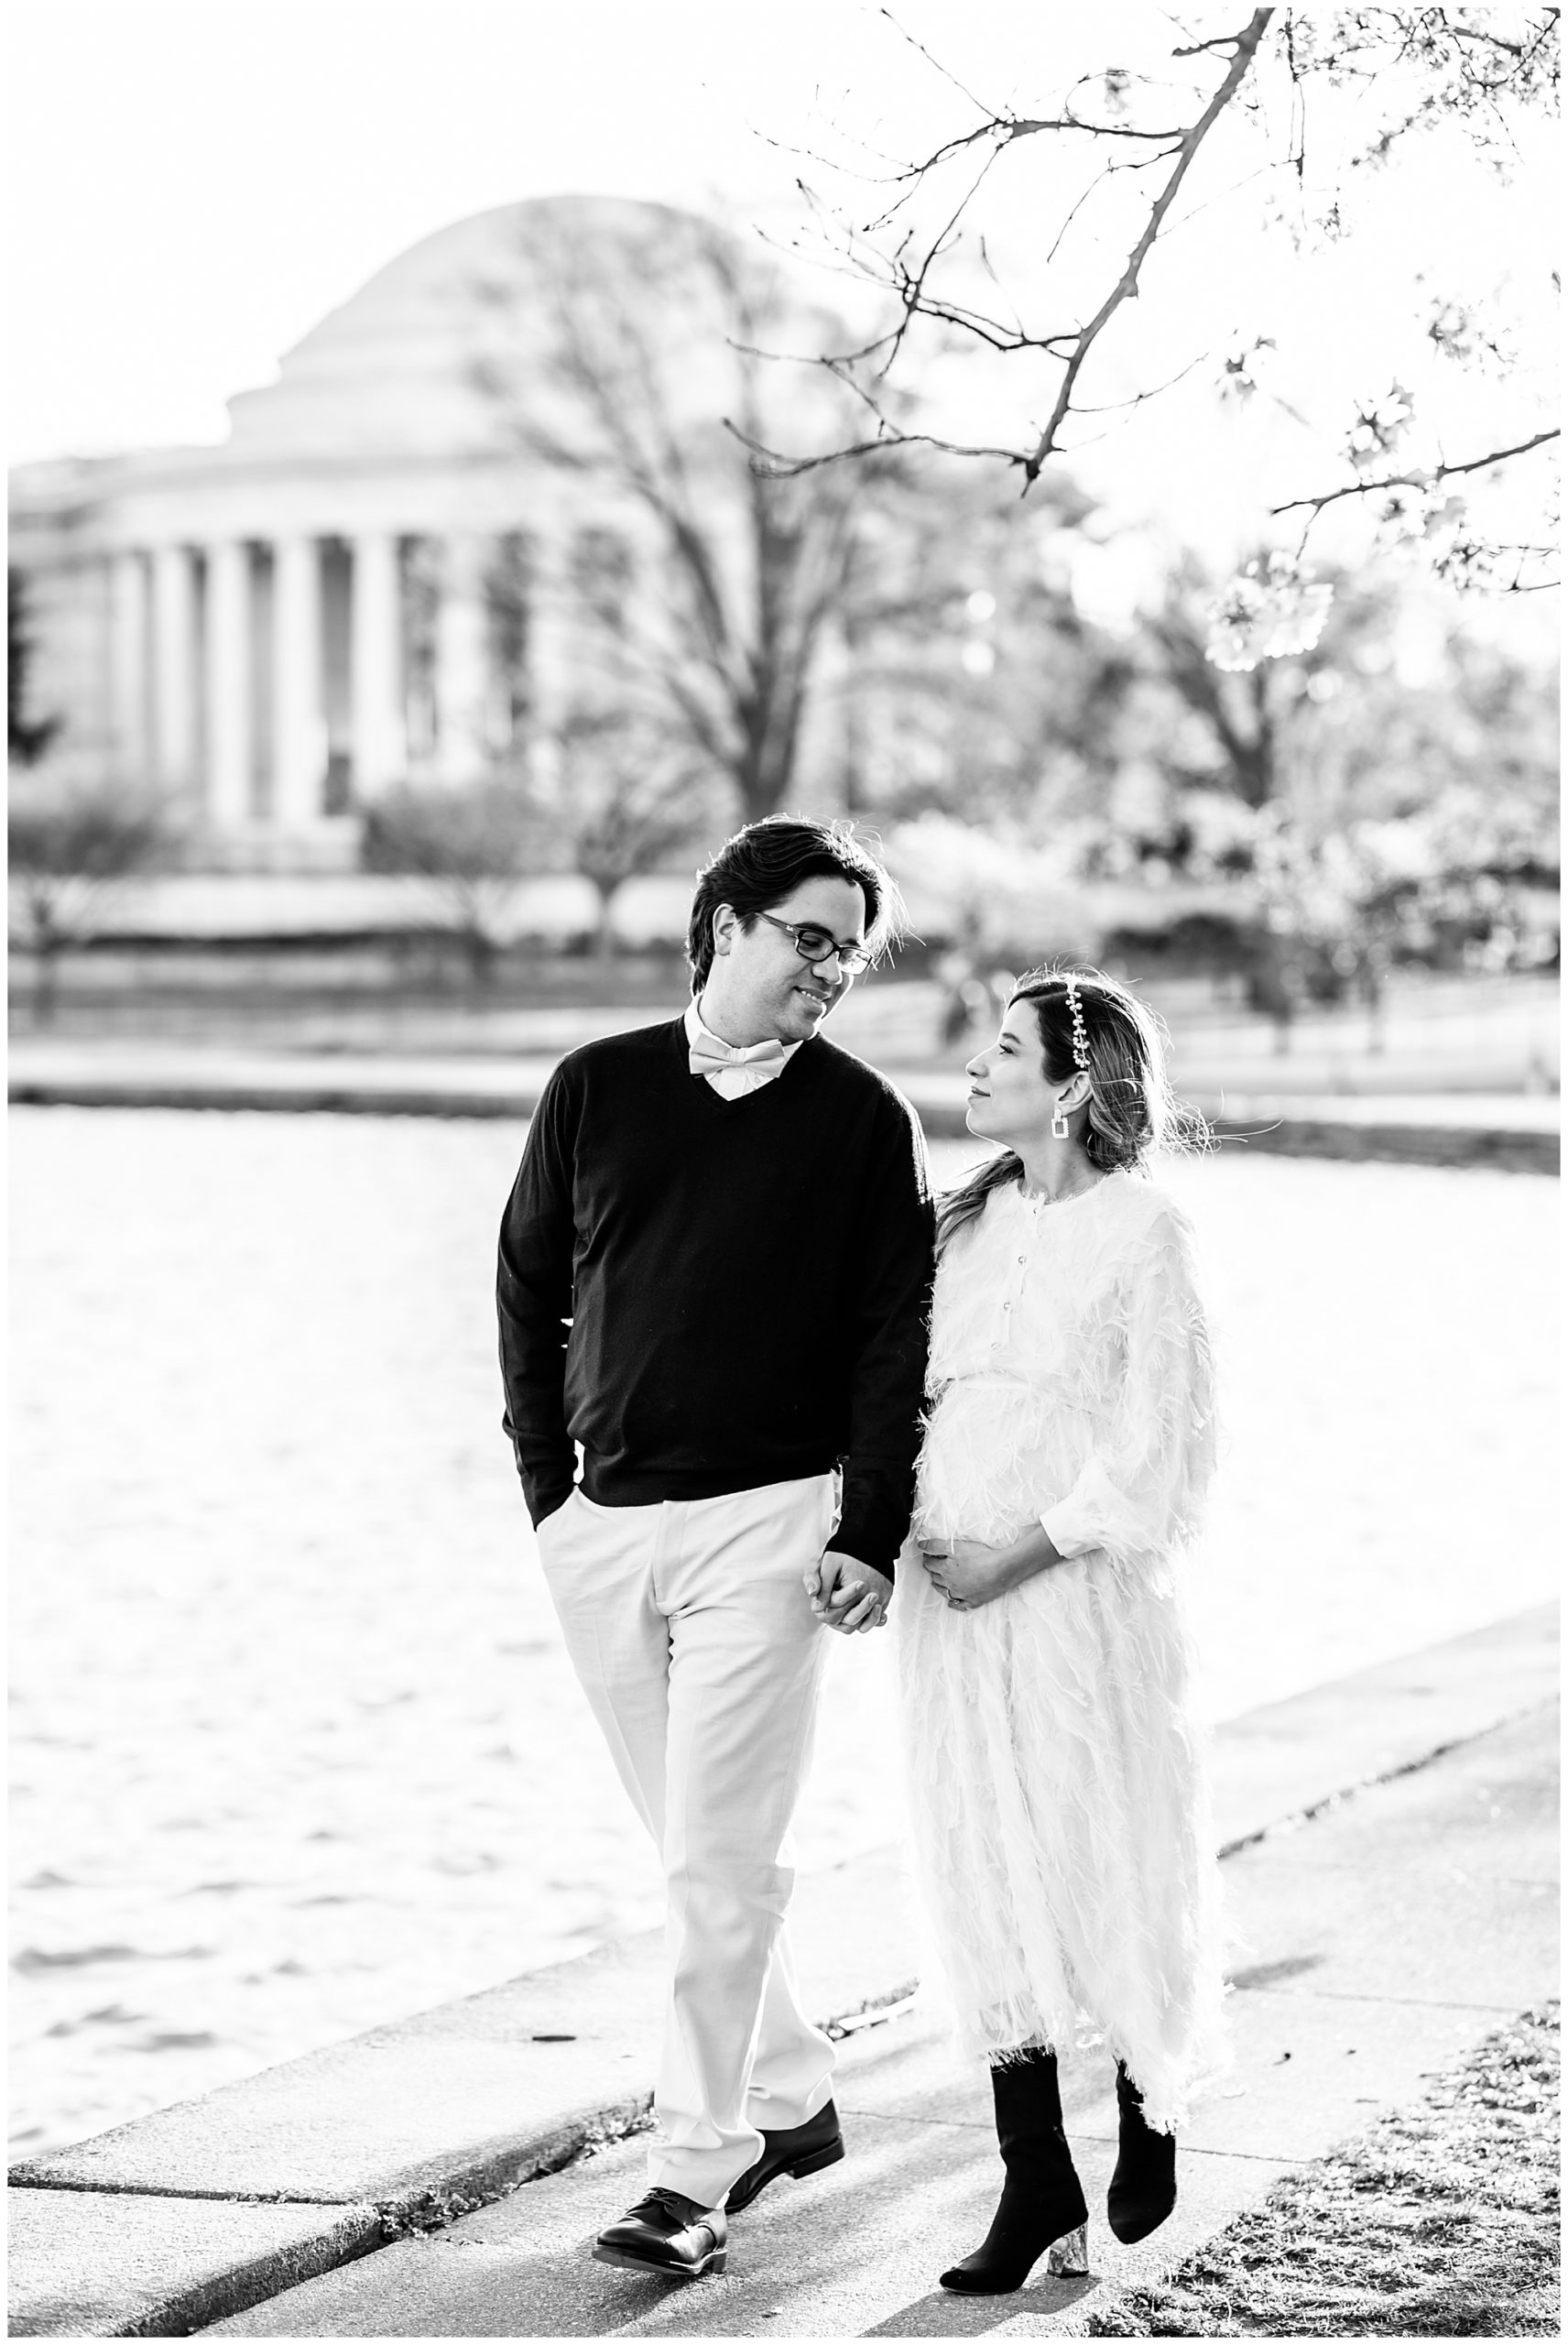 spring cherry blossoms maternity photos, spring portraits, spring maternity photos, Rachel E.H. Photography, spring in DC, DC maternity photos, DC portraits, DC maternity photography, DC wedding photographer, fashionable maternity photos, black and white maternity photos